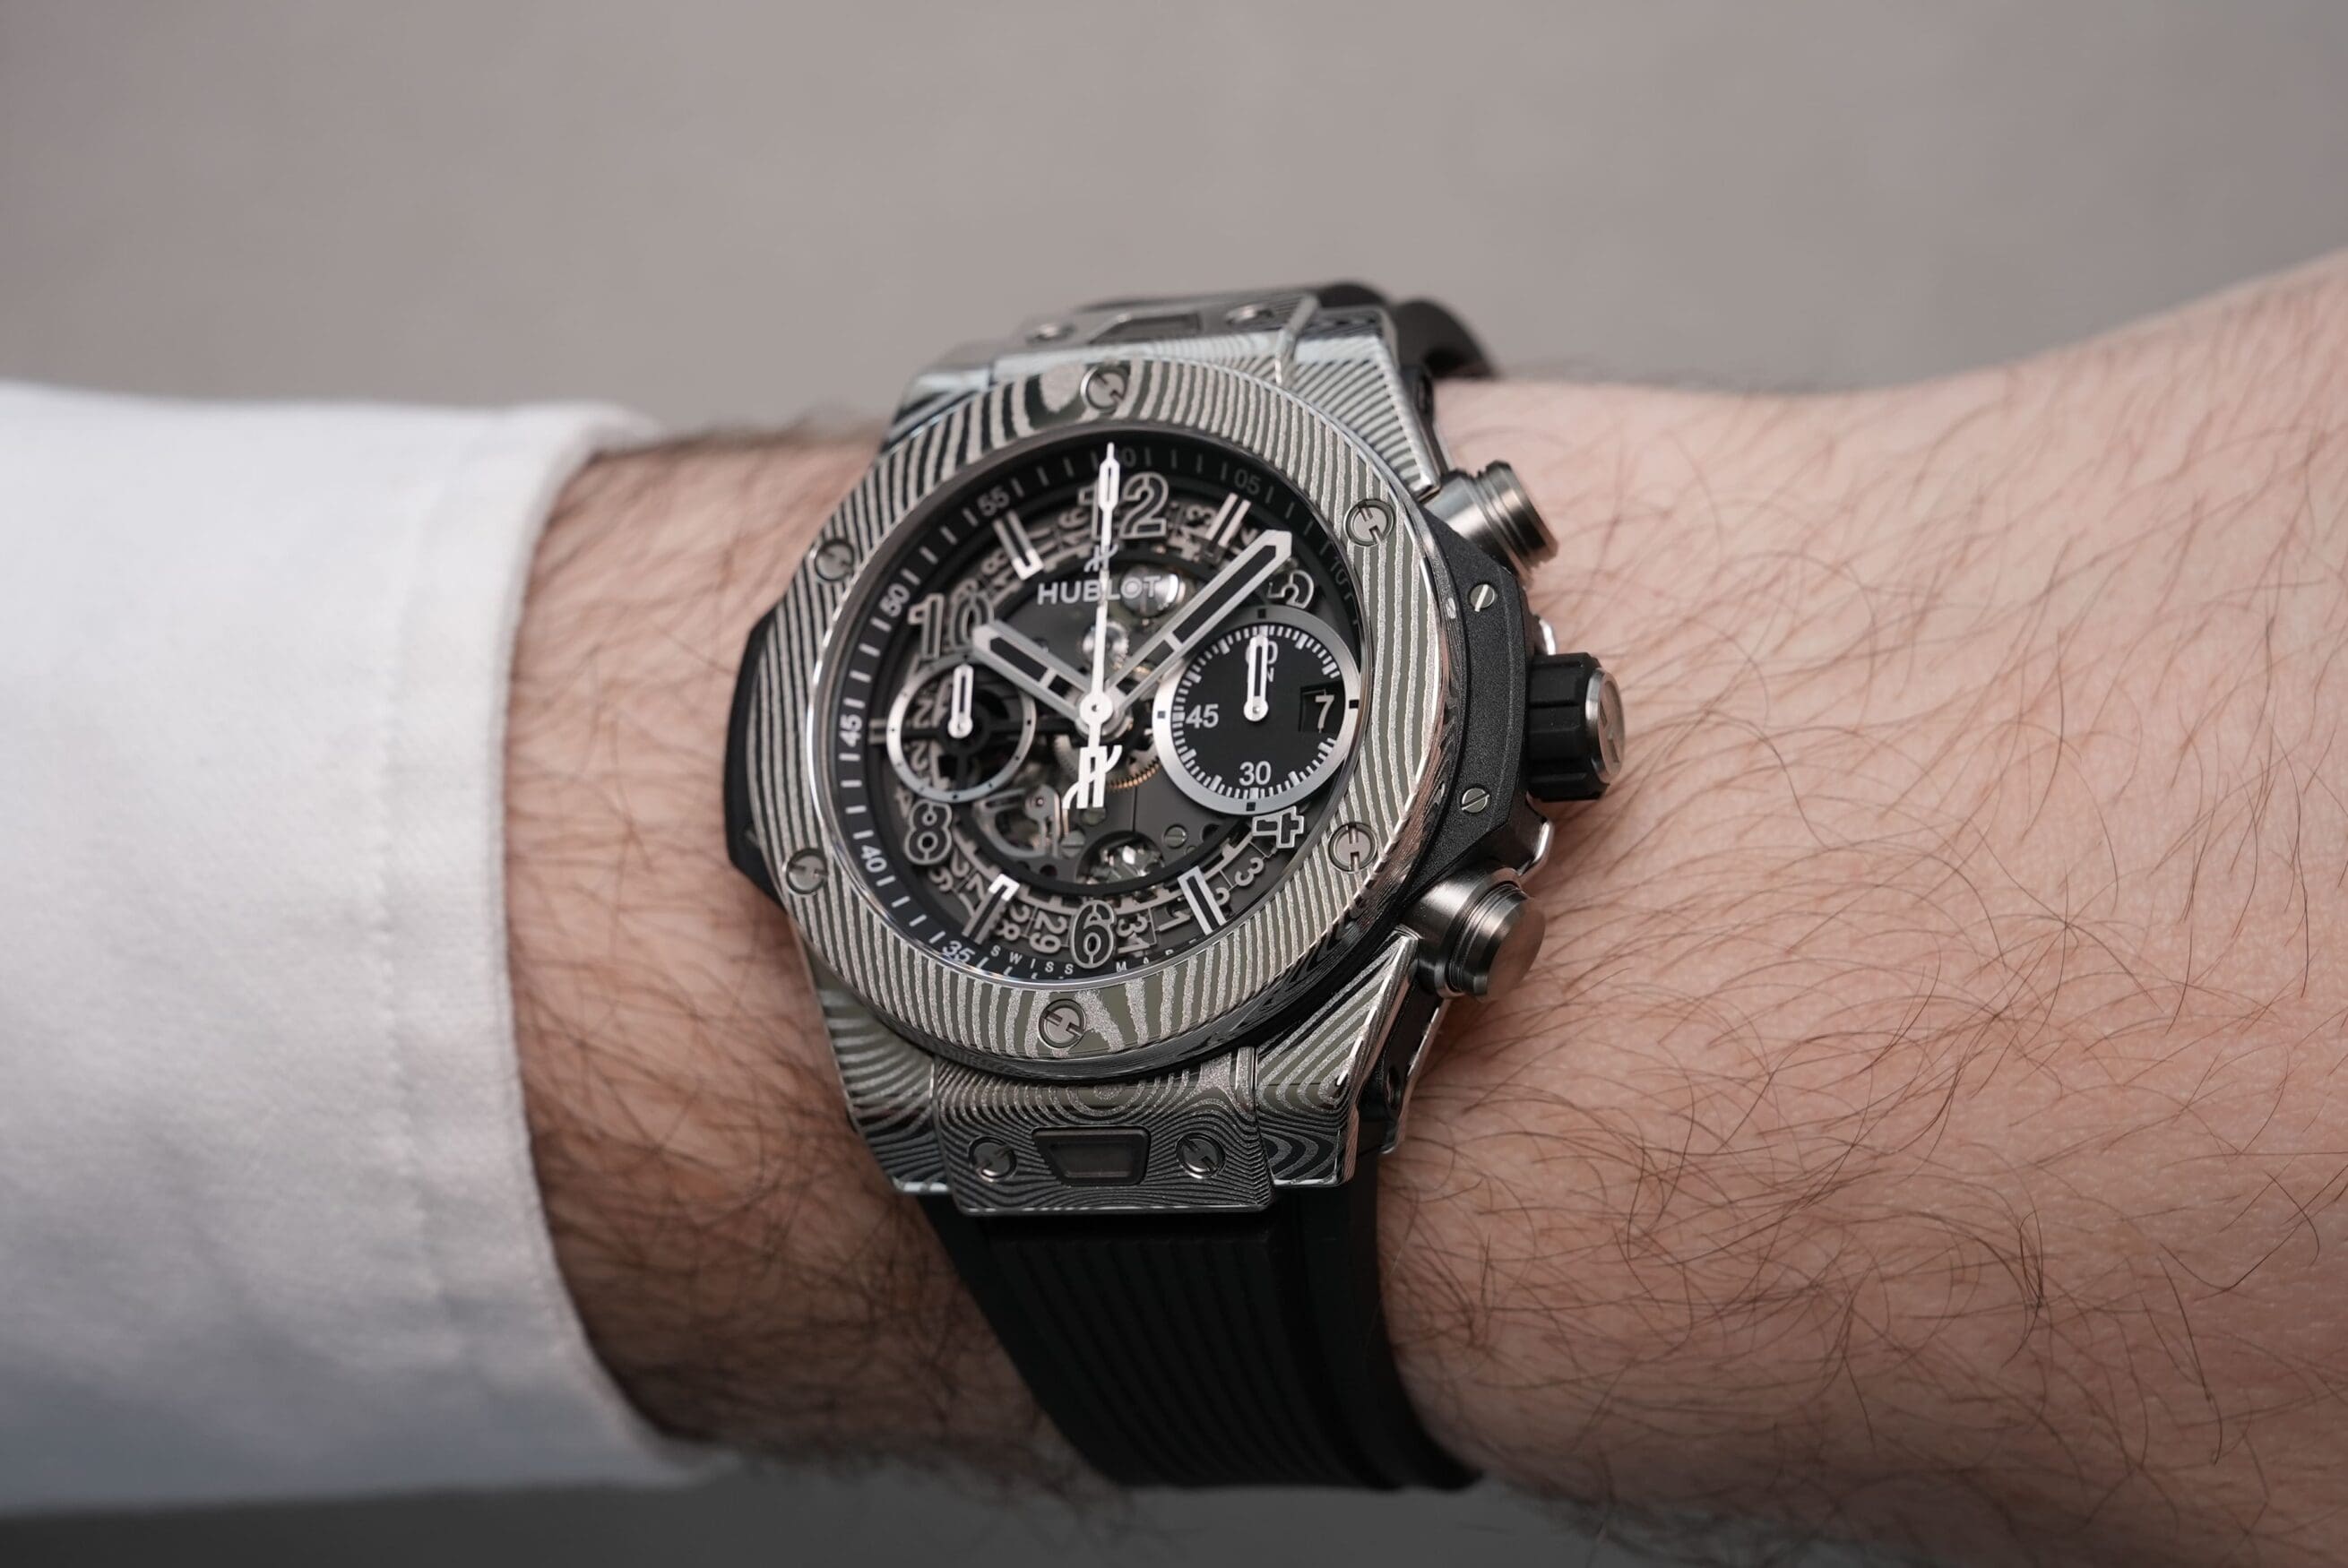 HANDS-ON: The Hublot Big Bang Unico Gourmet cooks up something special with its Damascus steel case